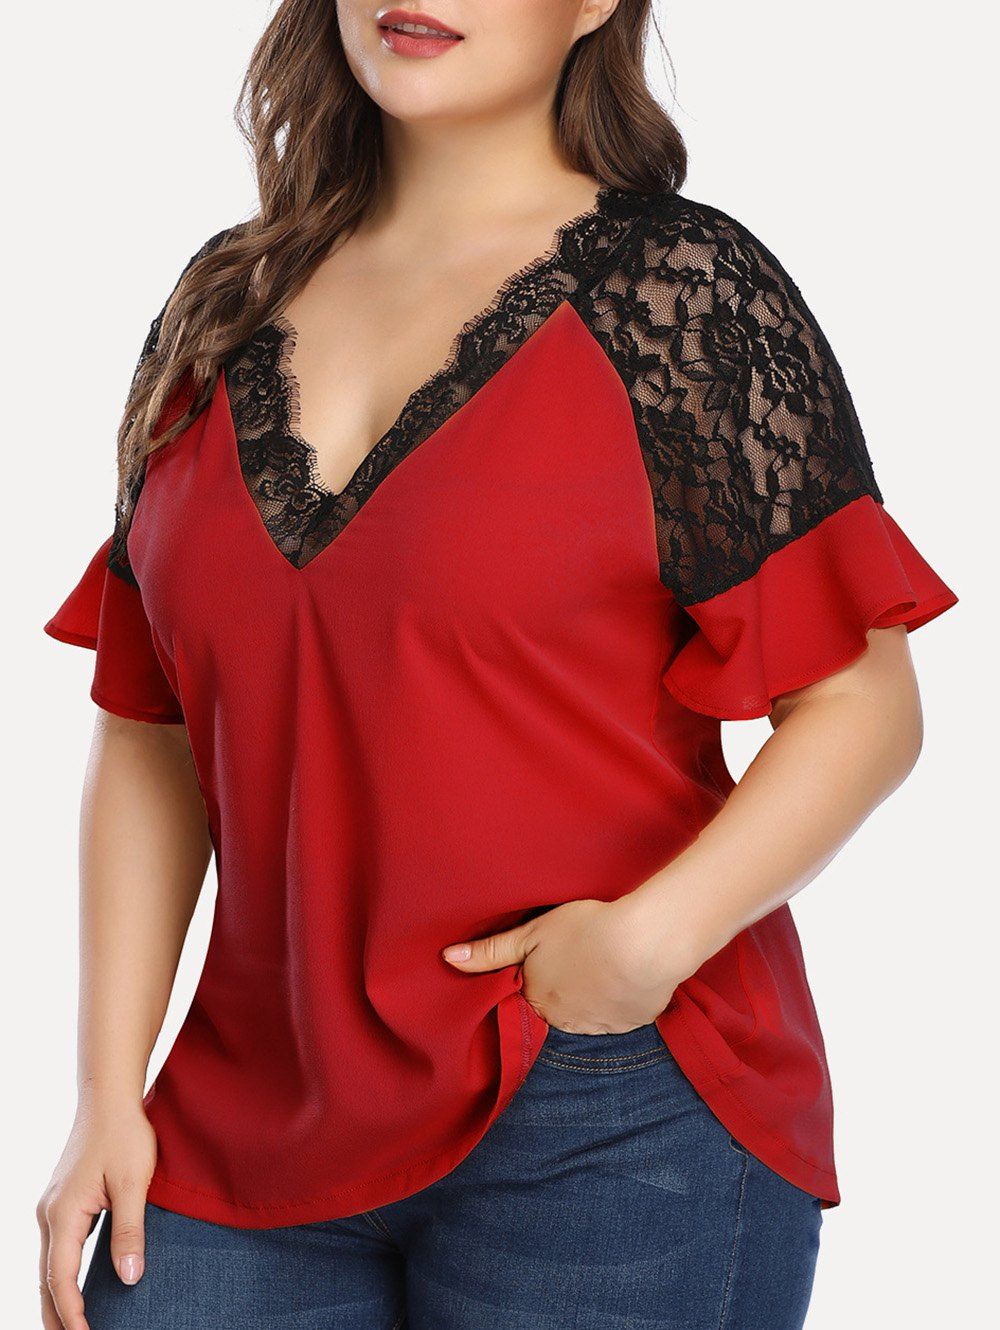 [27% OFF] 2020 Plus Size Contrast Lace Low Cut Blouse In RED | DressLily